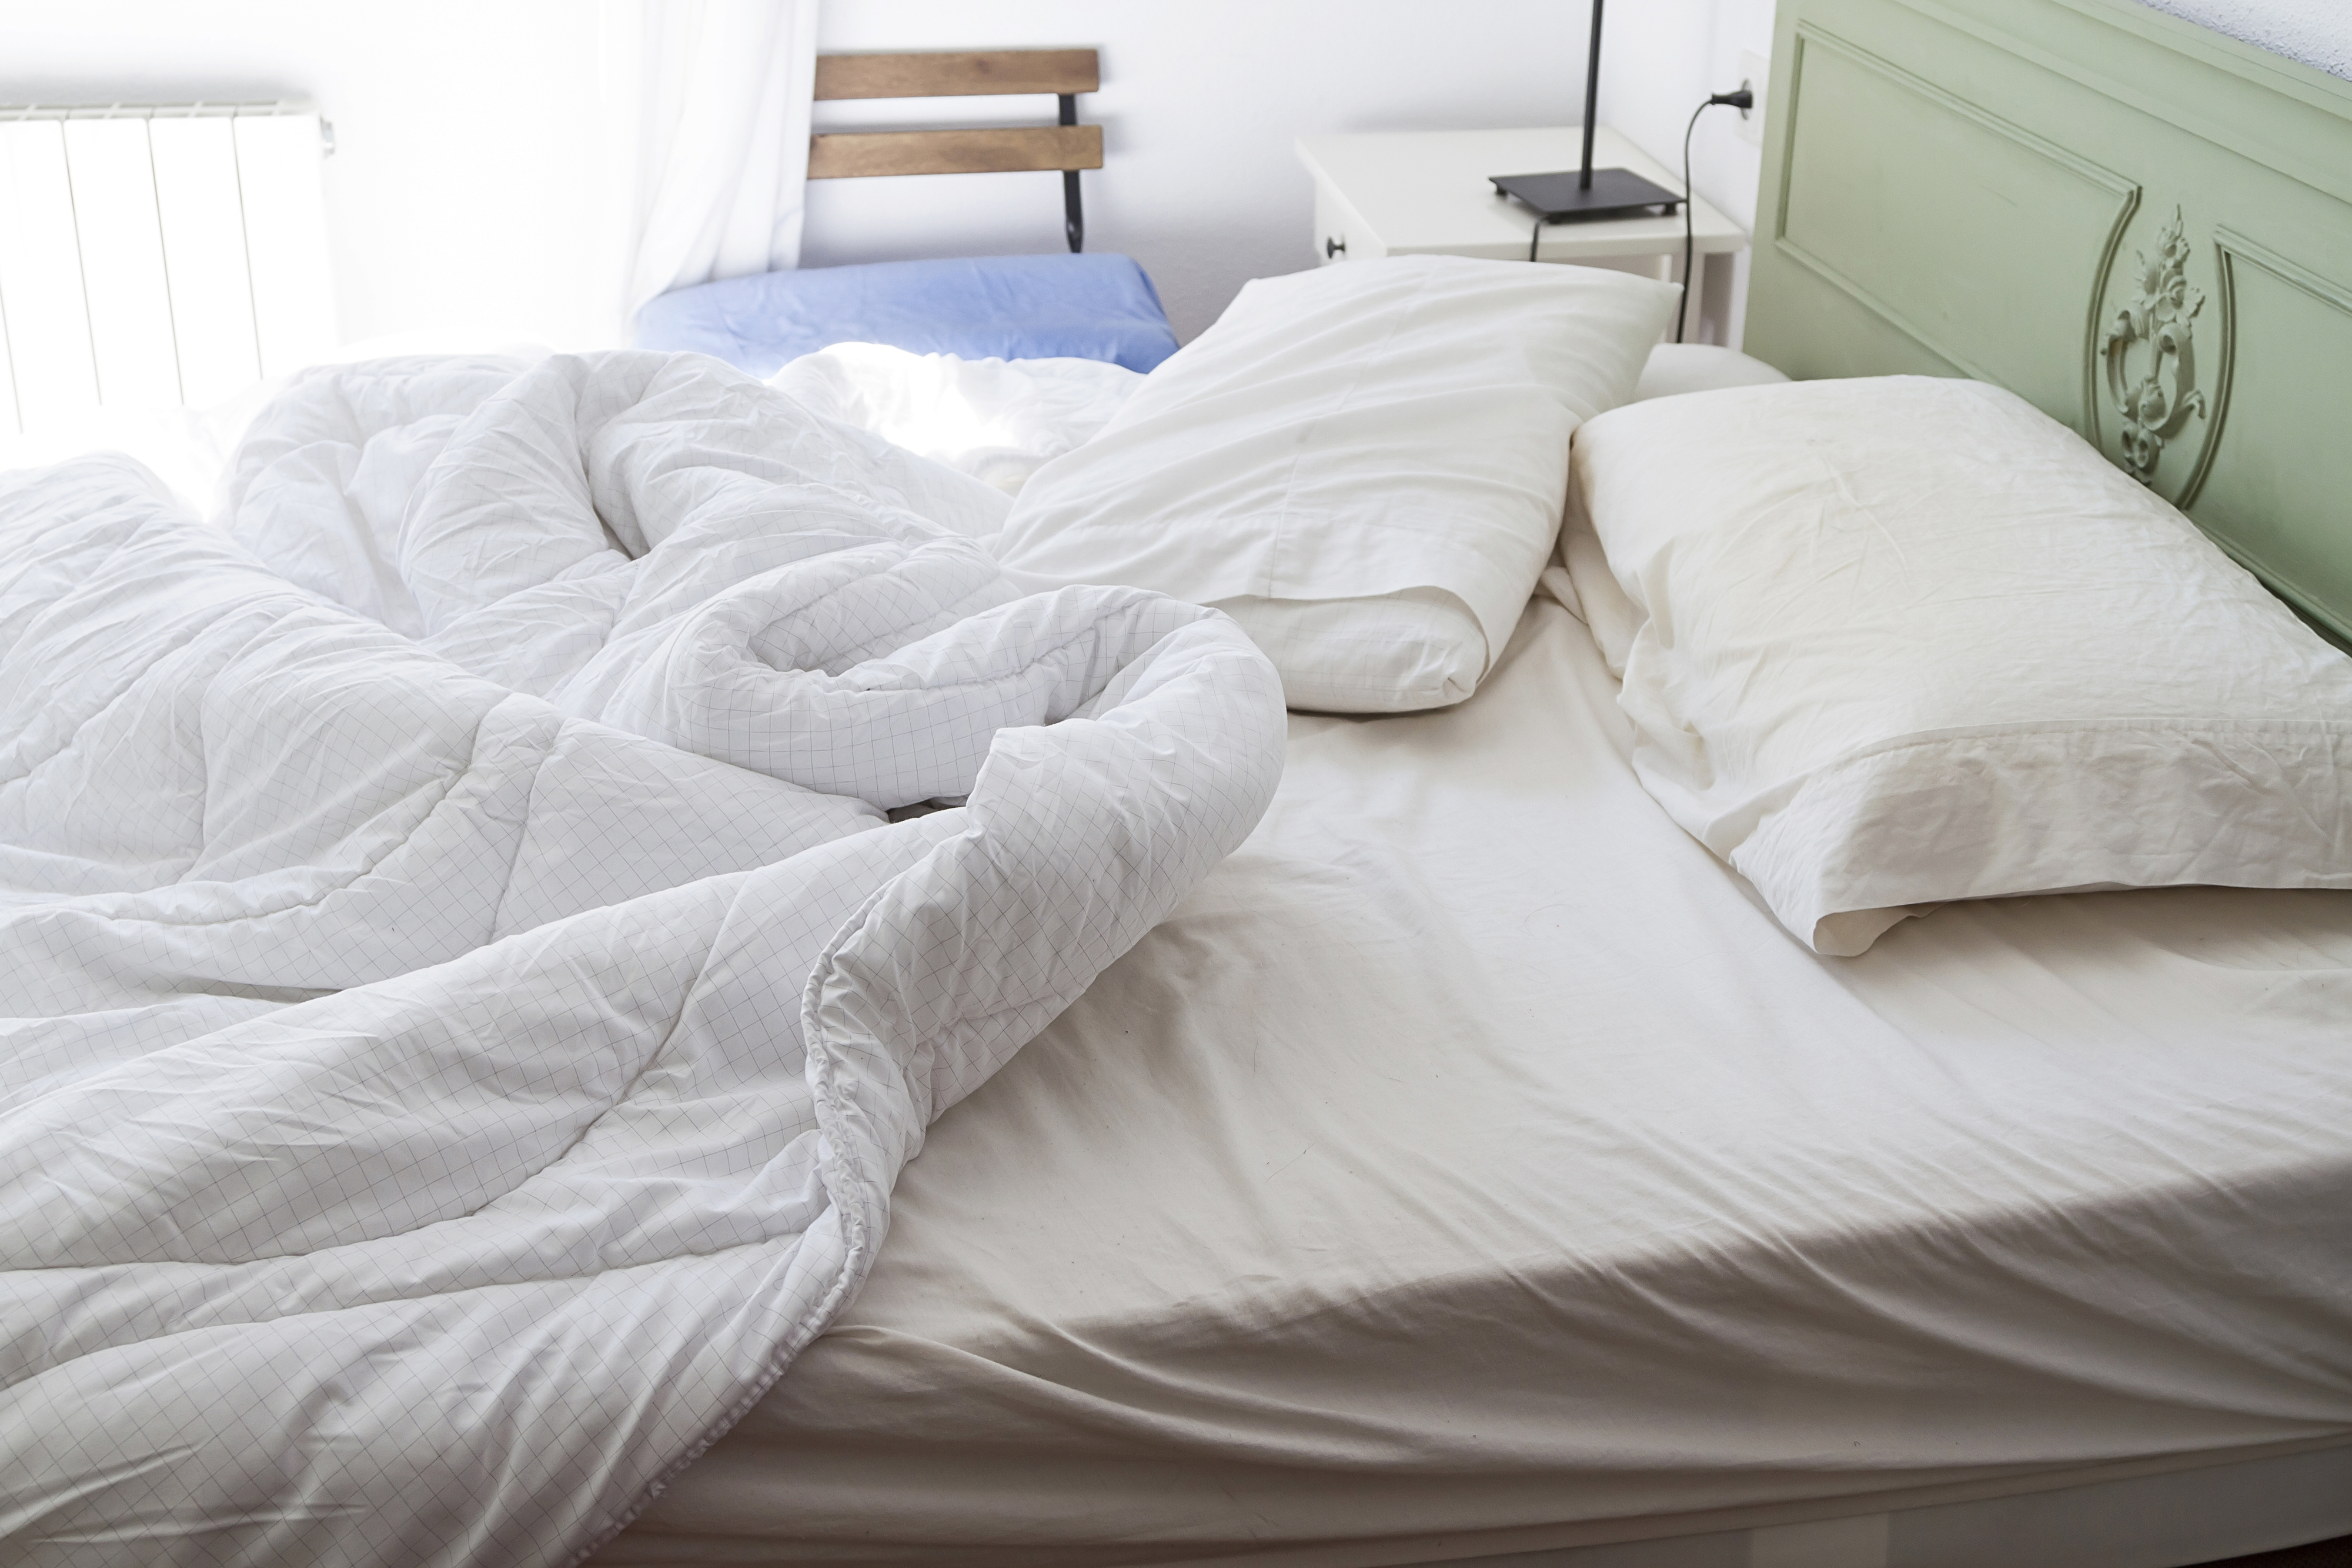 Unmade bed with a rumpled white duvet and two pillows in a bright room